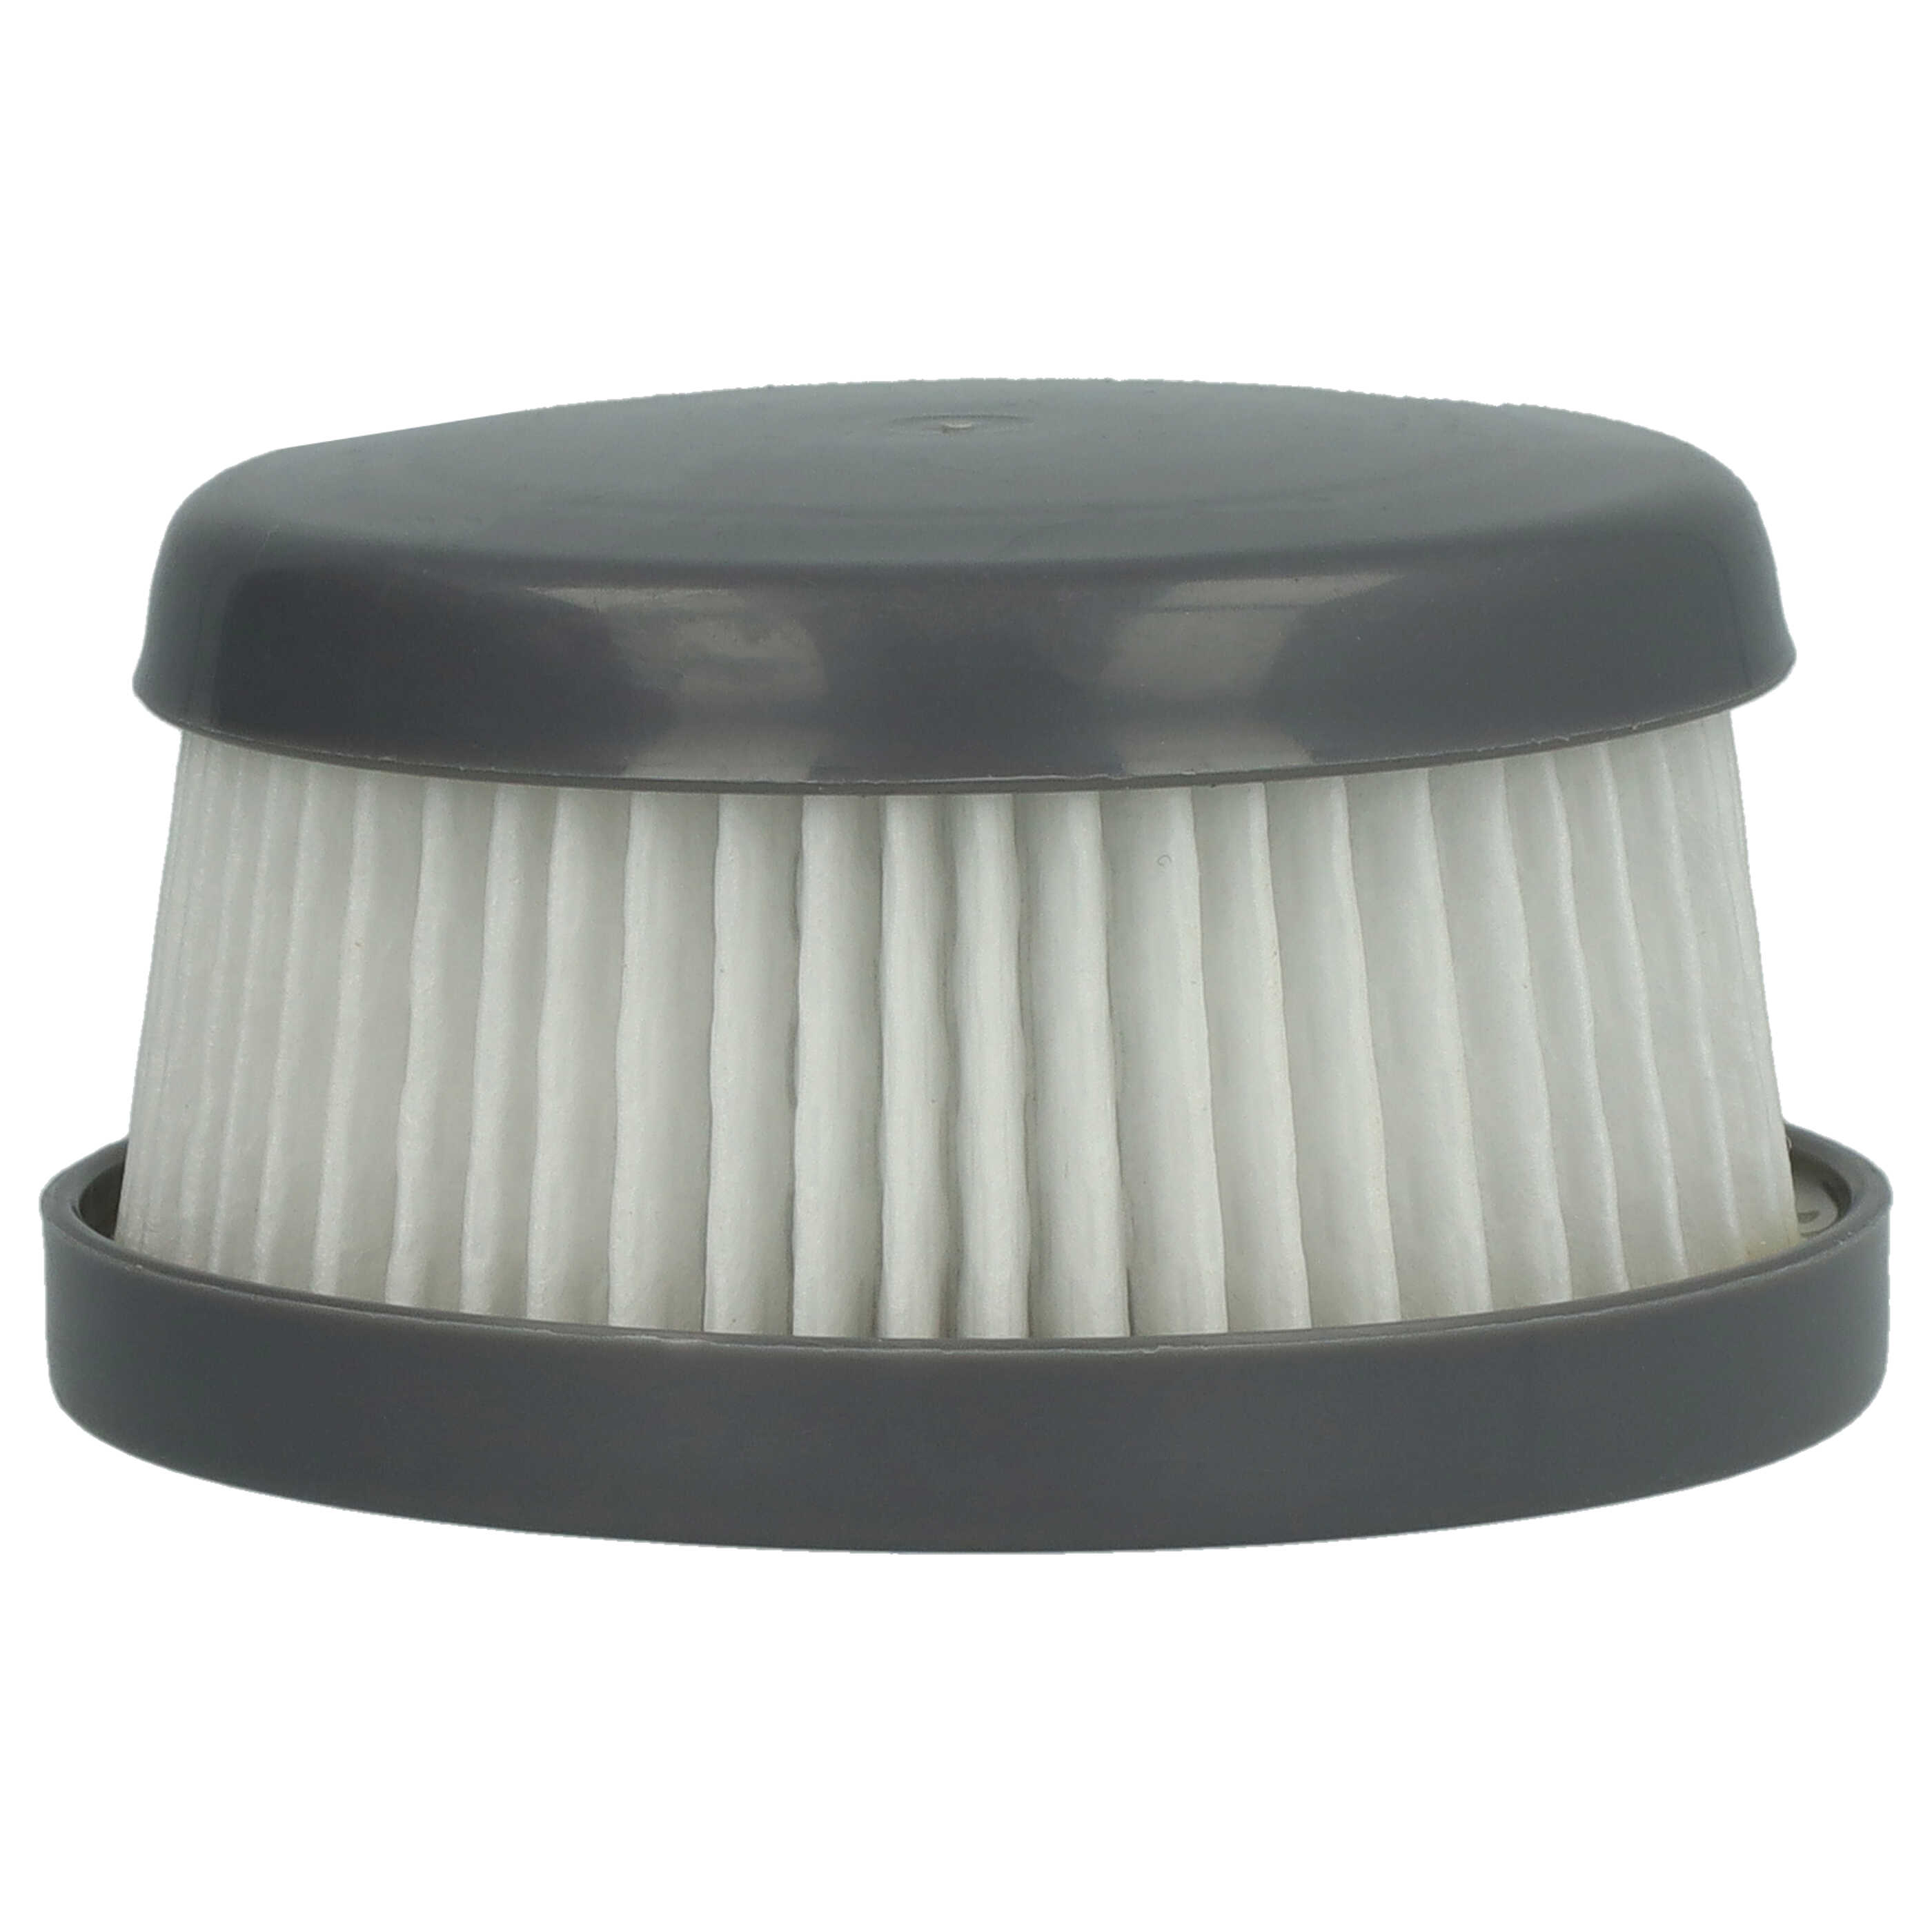 1x filter replaces Black & Decker VFORB10 for Black & Decker Vacuum Cleaner, grey / white